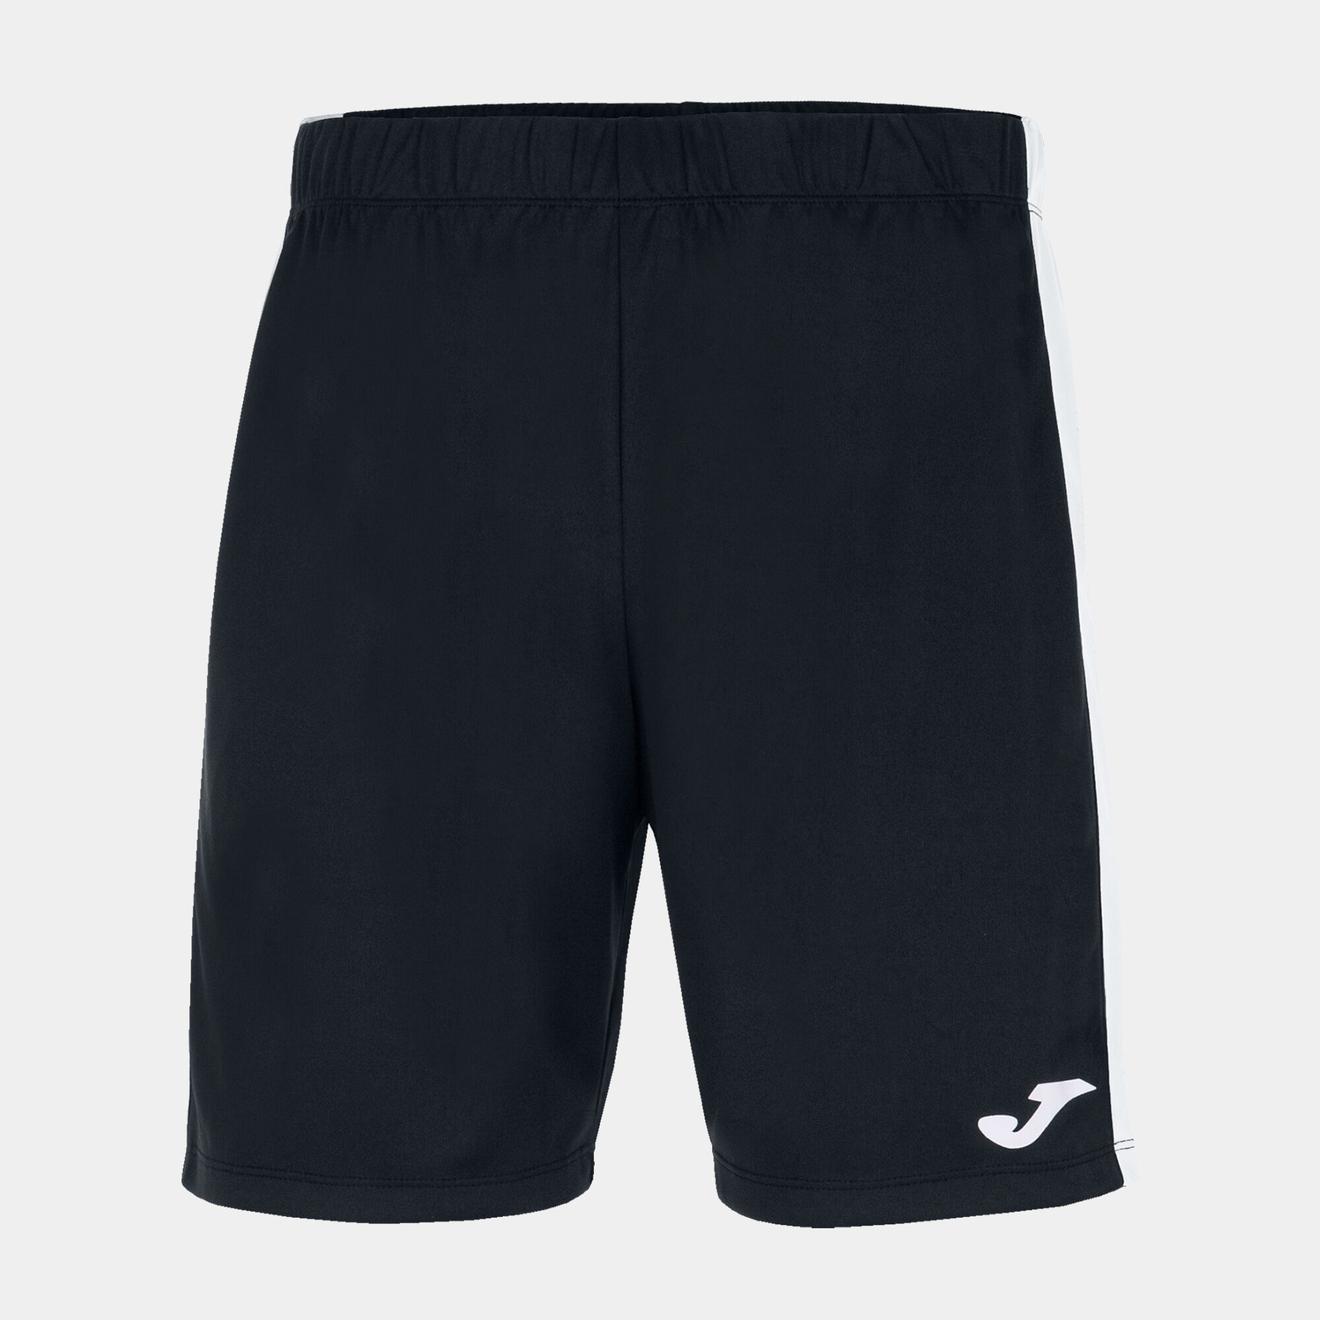 Shorts man Maxi black white offers at £10.35 in Joma